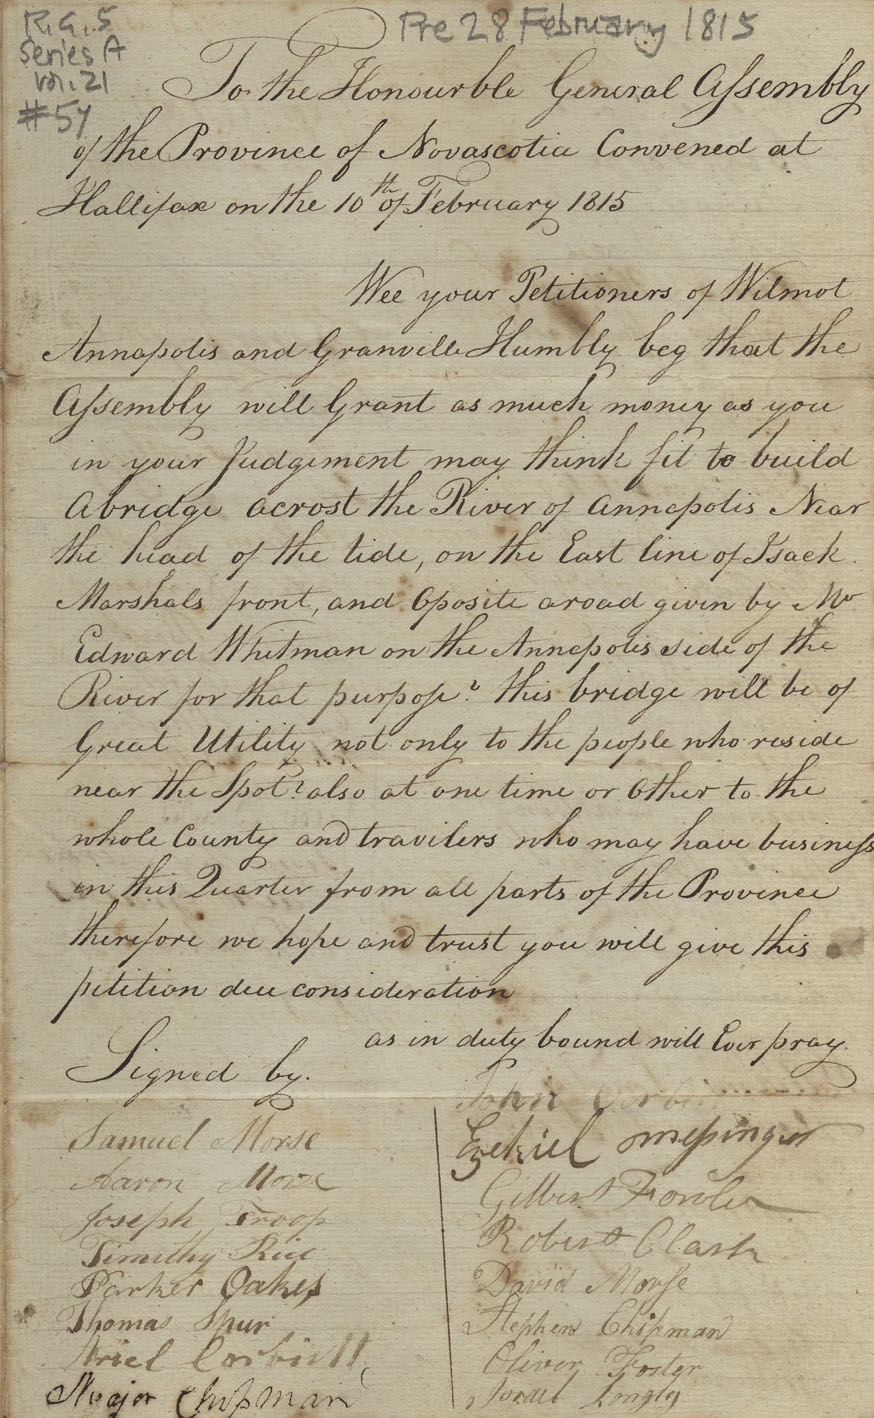 assembly : Petition of Samuel Morse and other inhabitants of Wilmot, Annapolis and Granville, asking for a grant for building a bridge across the Annap